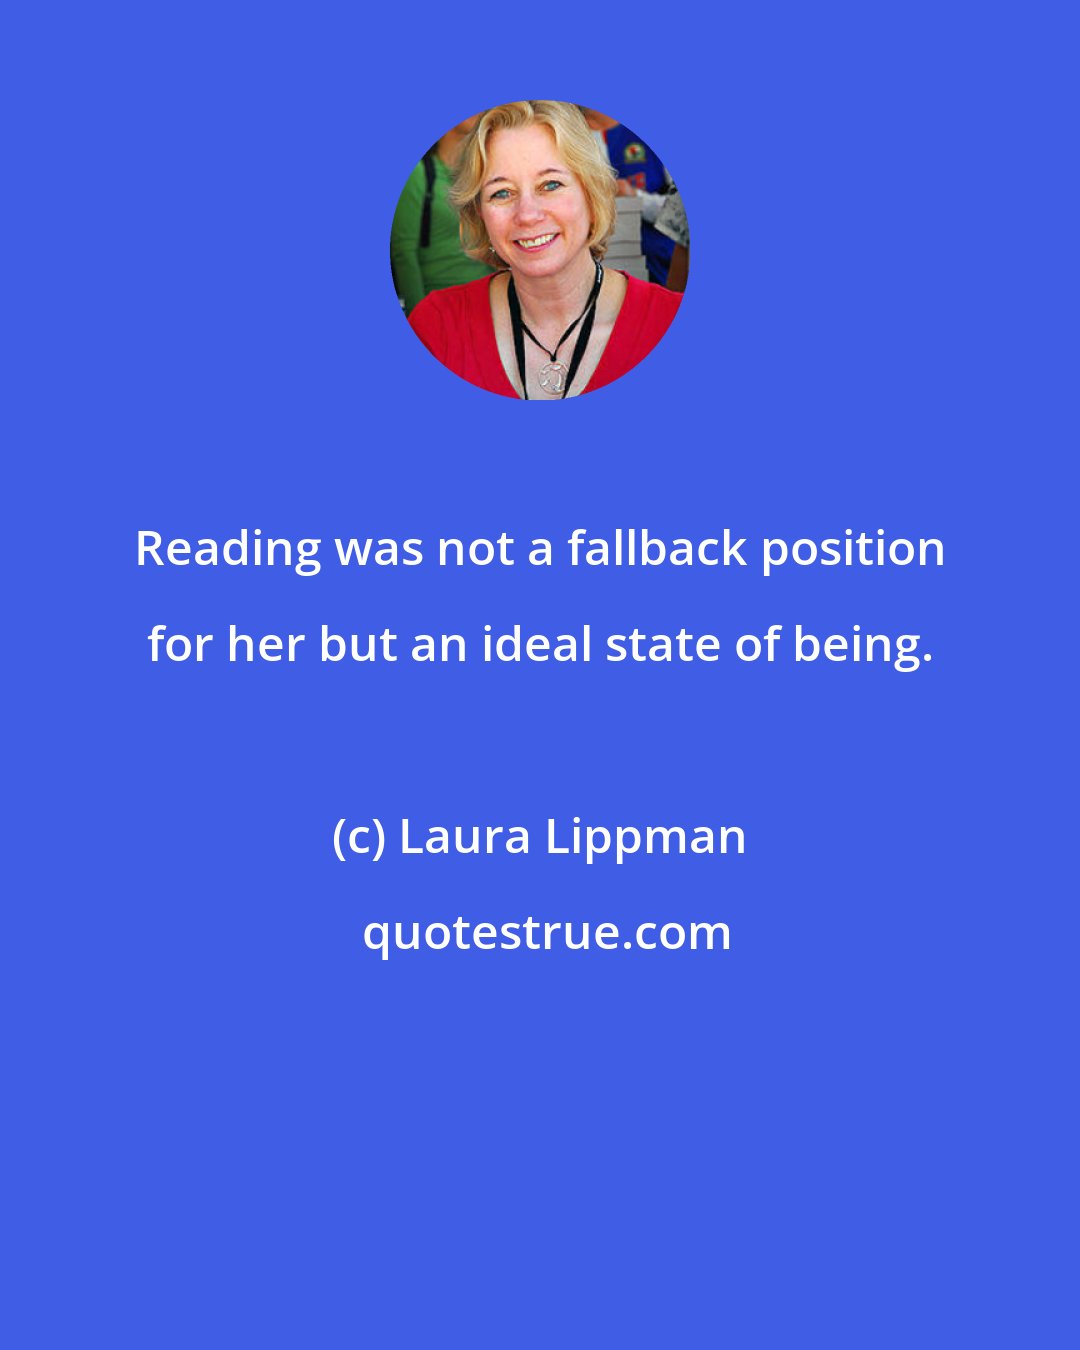 Laura Lippman: Reading was not a fallback position for her but an ideal state of being.